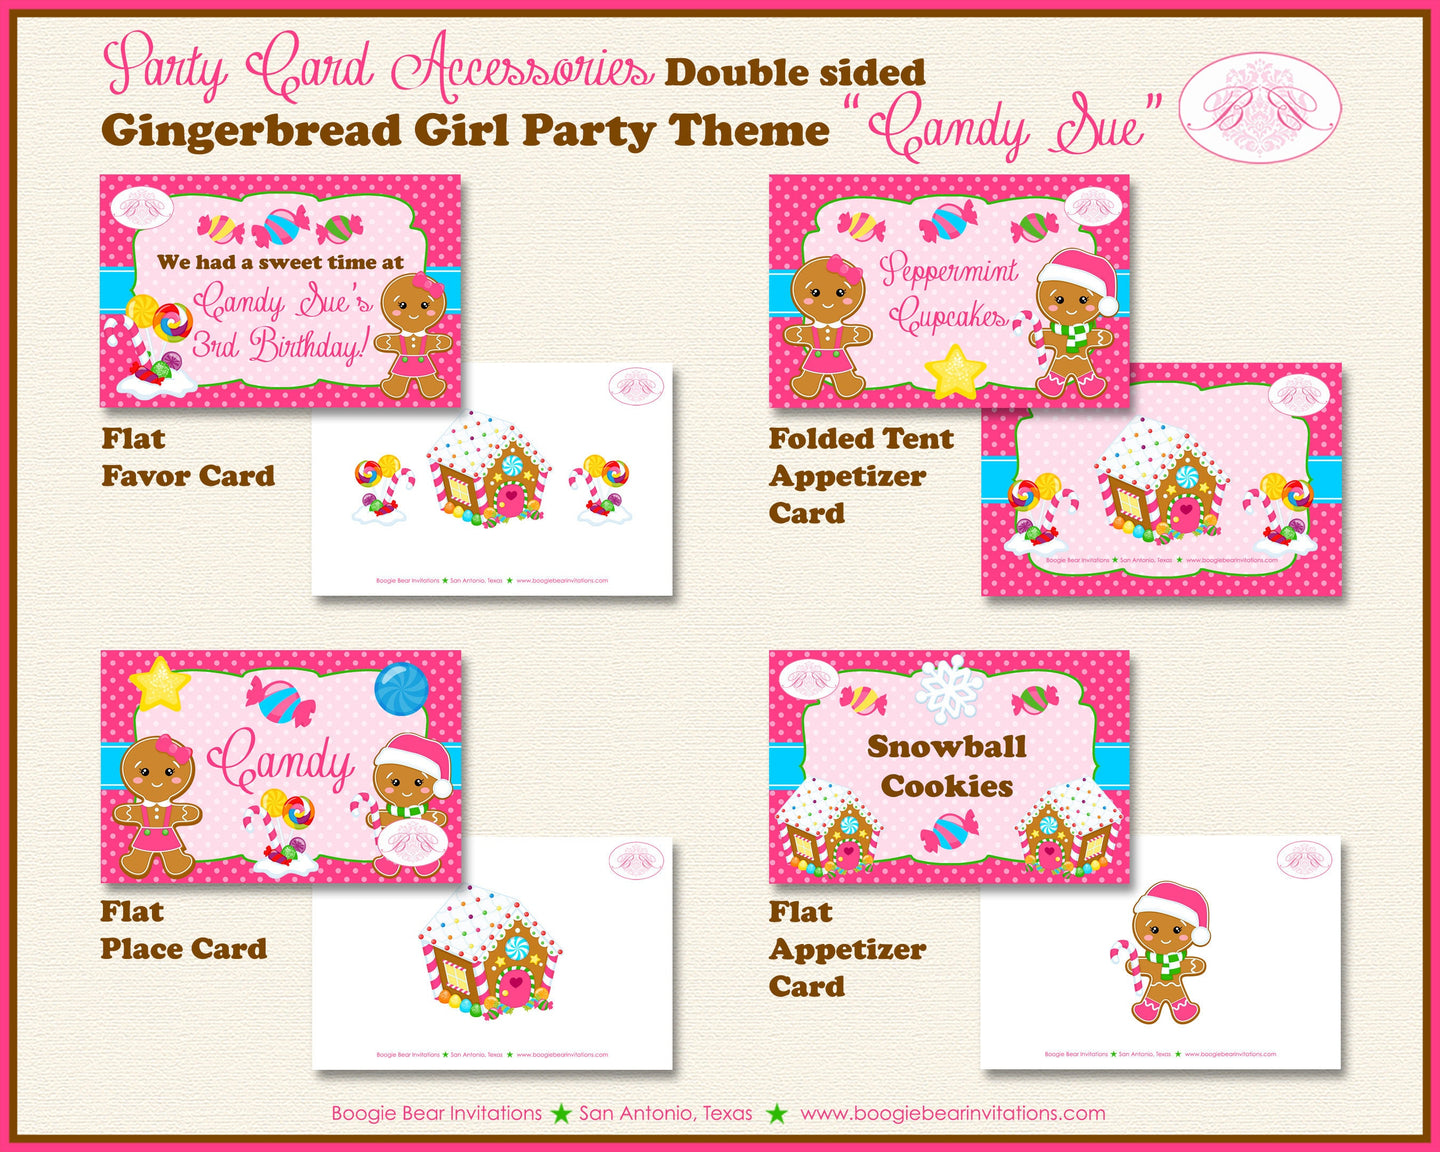 Gingerbread Girl Birthday Party Favor Card Appetizer Food Place Sign Label Pink Winter Christmas Kid Boogie Bear Invitations Candy Sue Theme